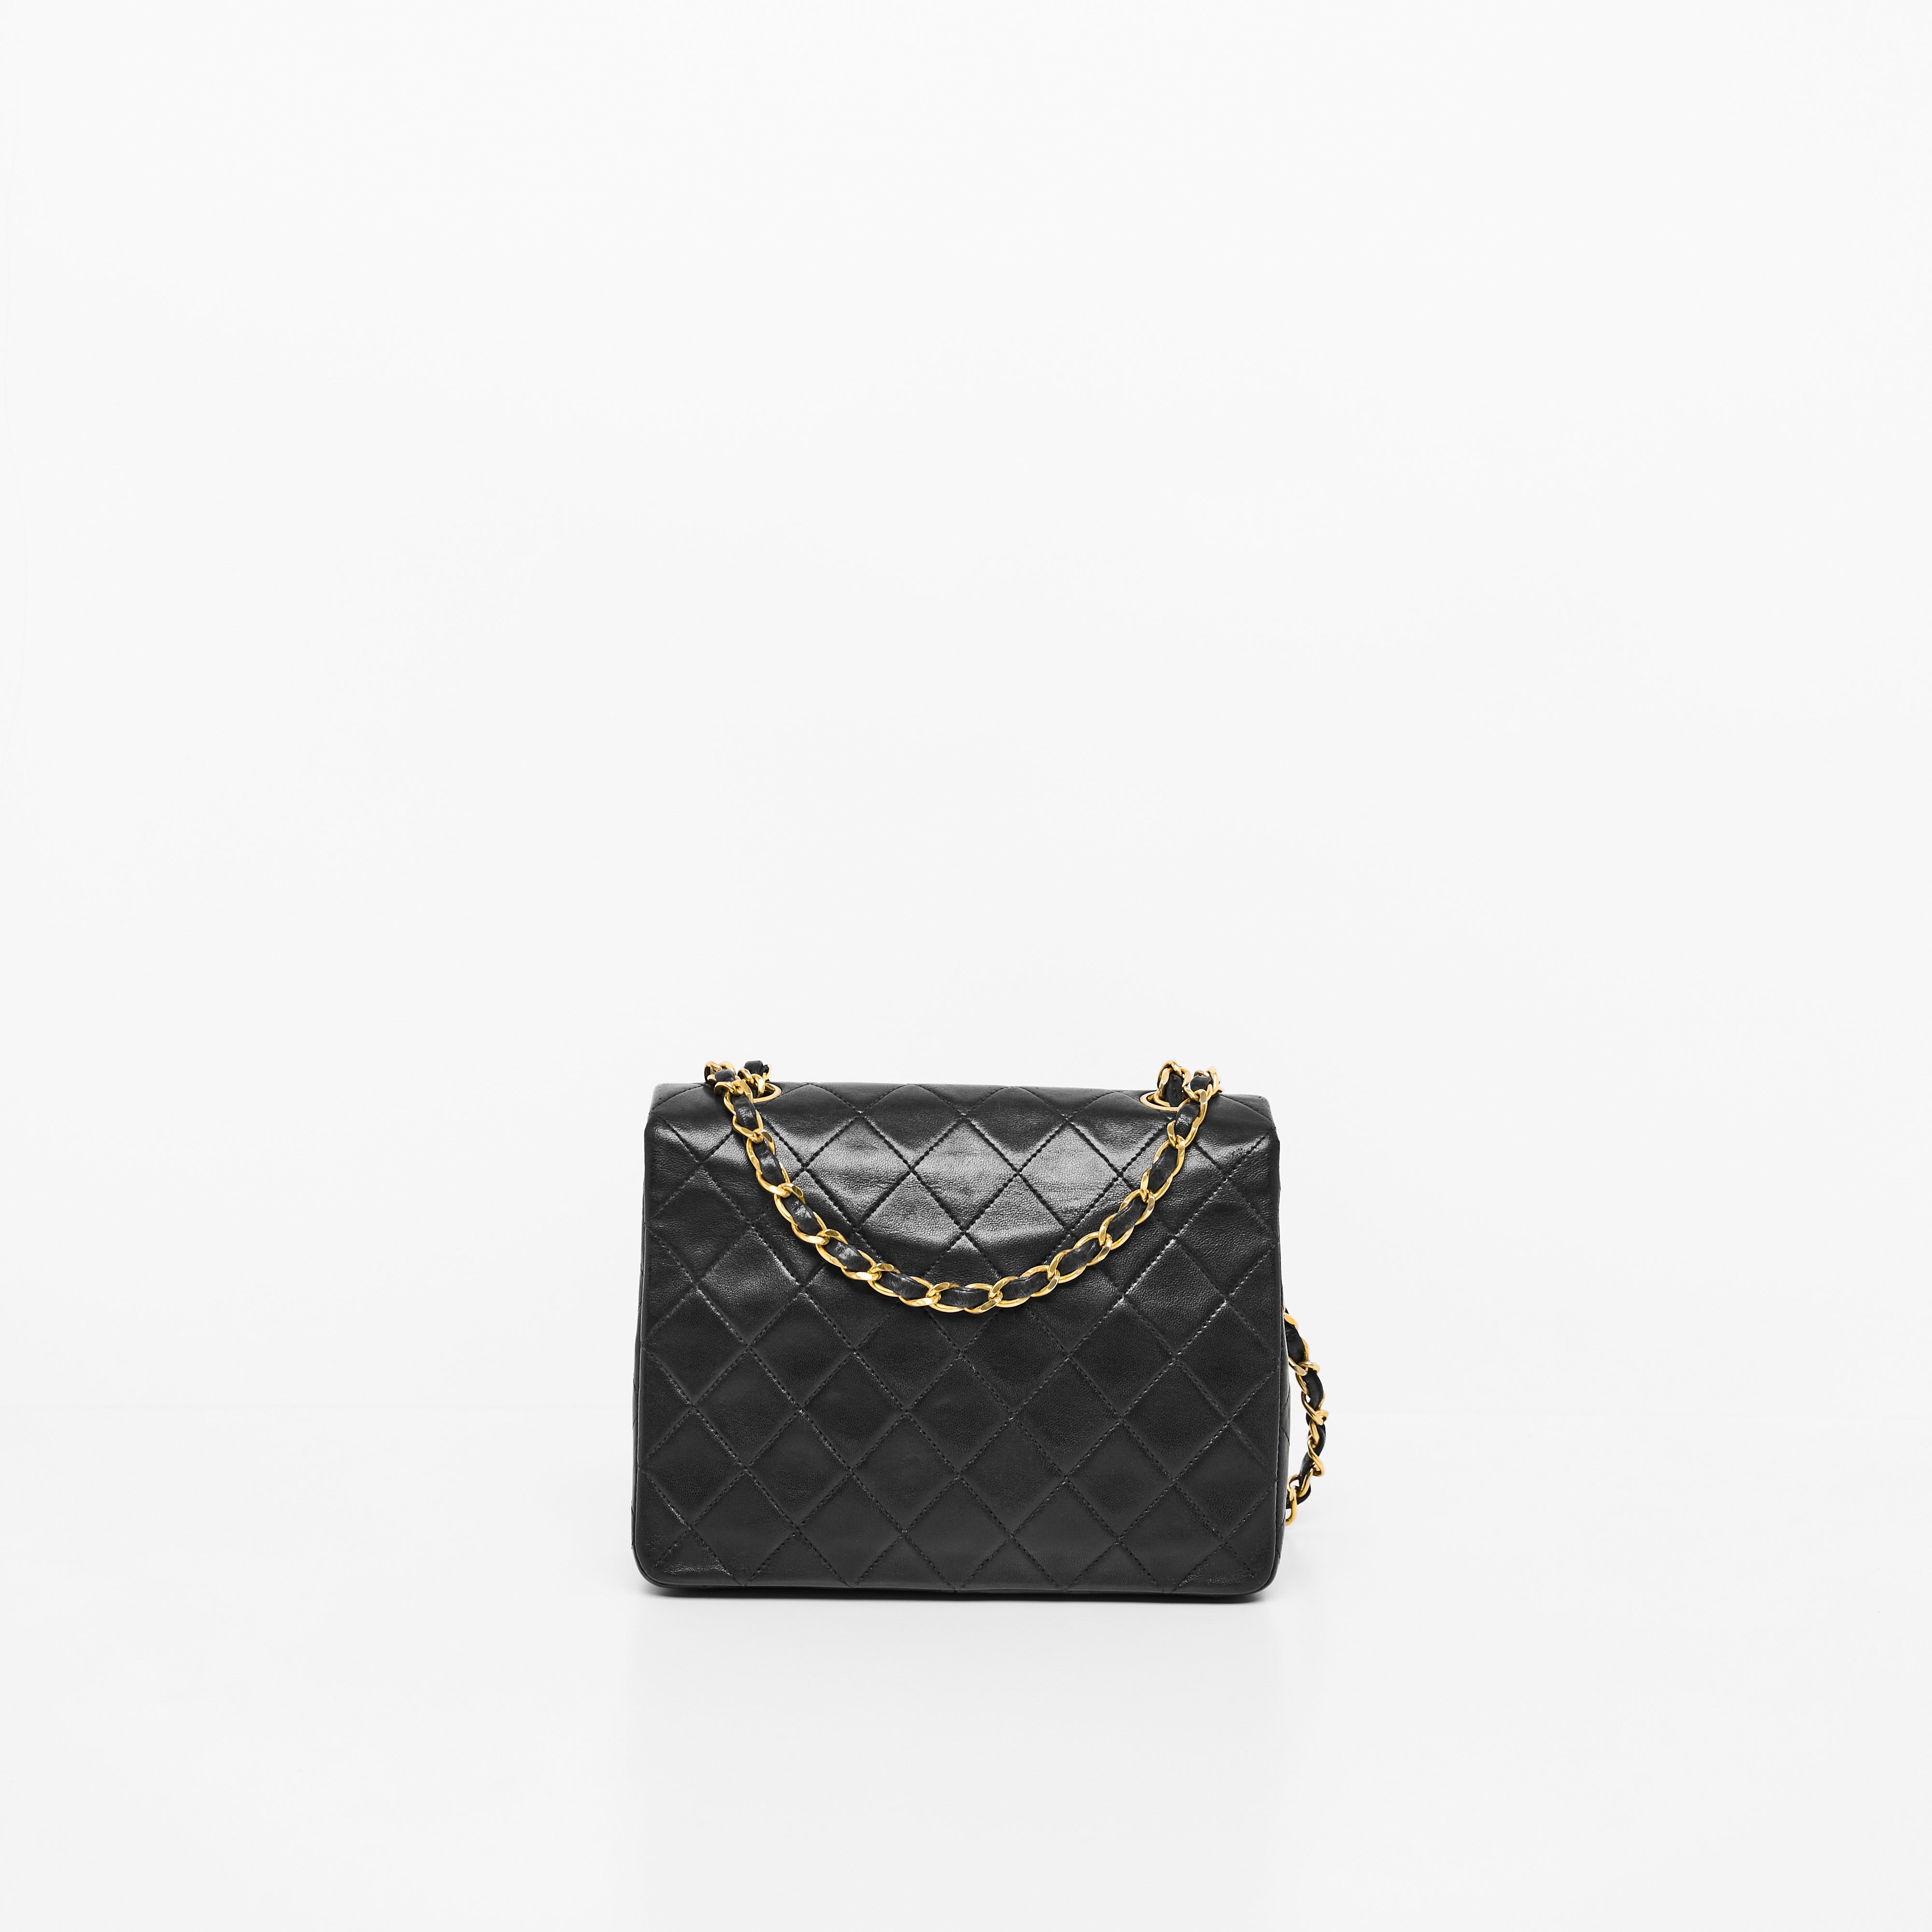 Chanel Vintage Classic Flap Small